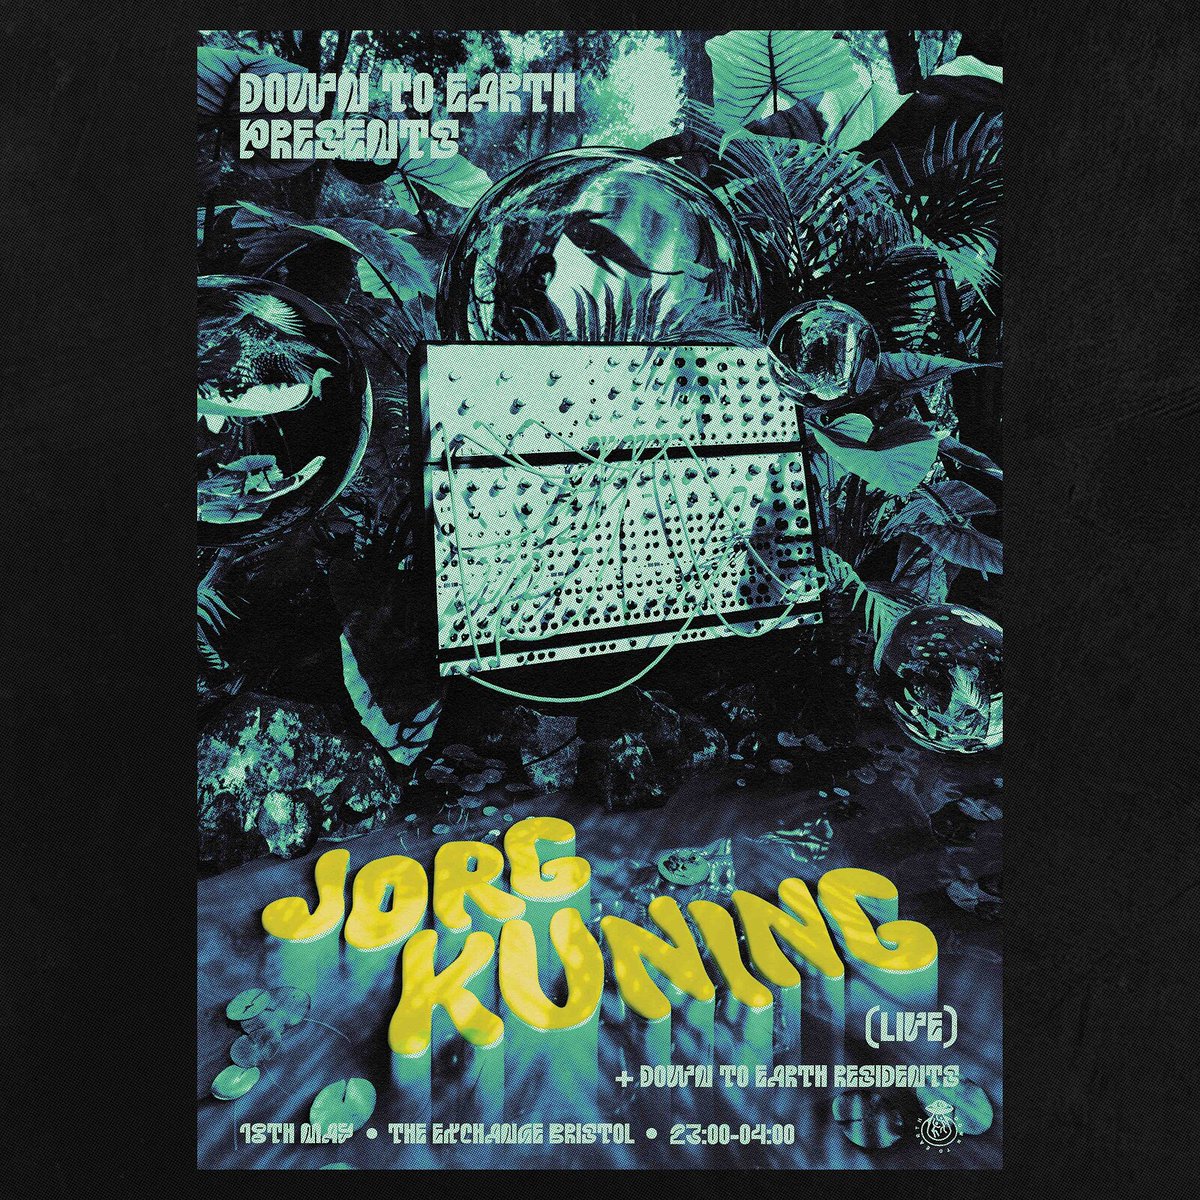 Welsh modular synth maestro JORG KUNING to perform his mind-blowing, unique, and playful live set // Tix cheaper in advance hdfst.uk/e106204